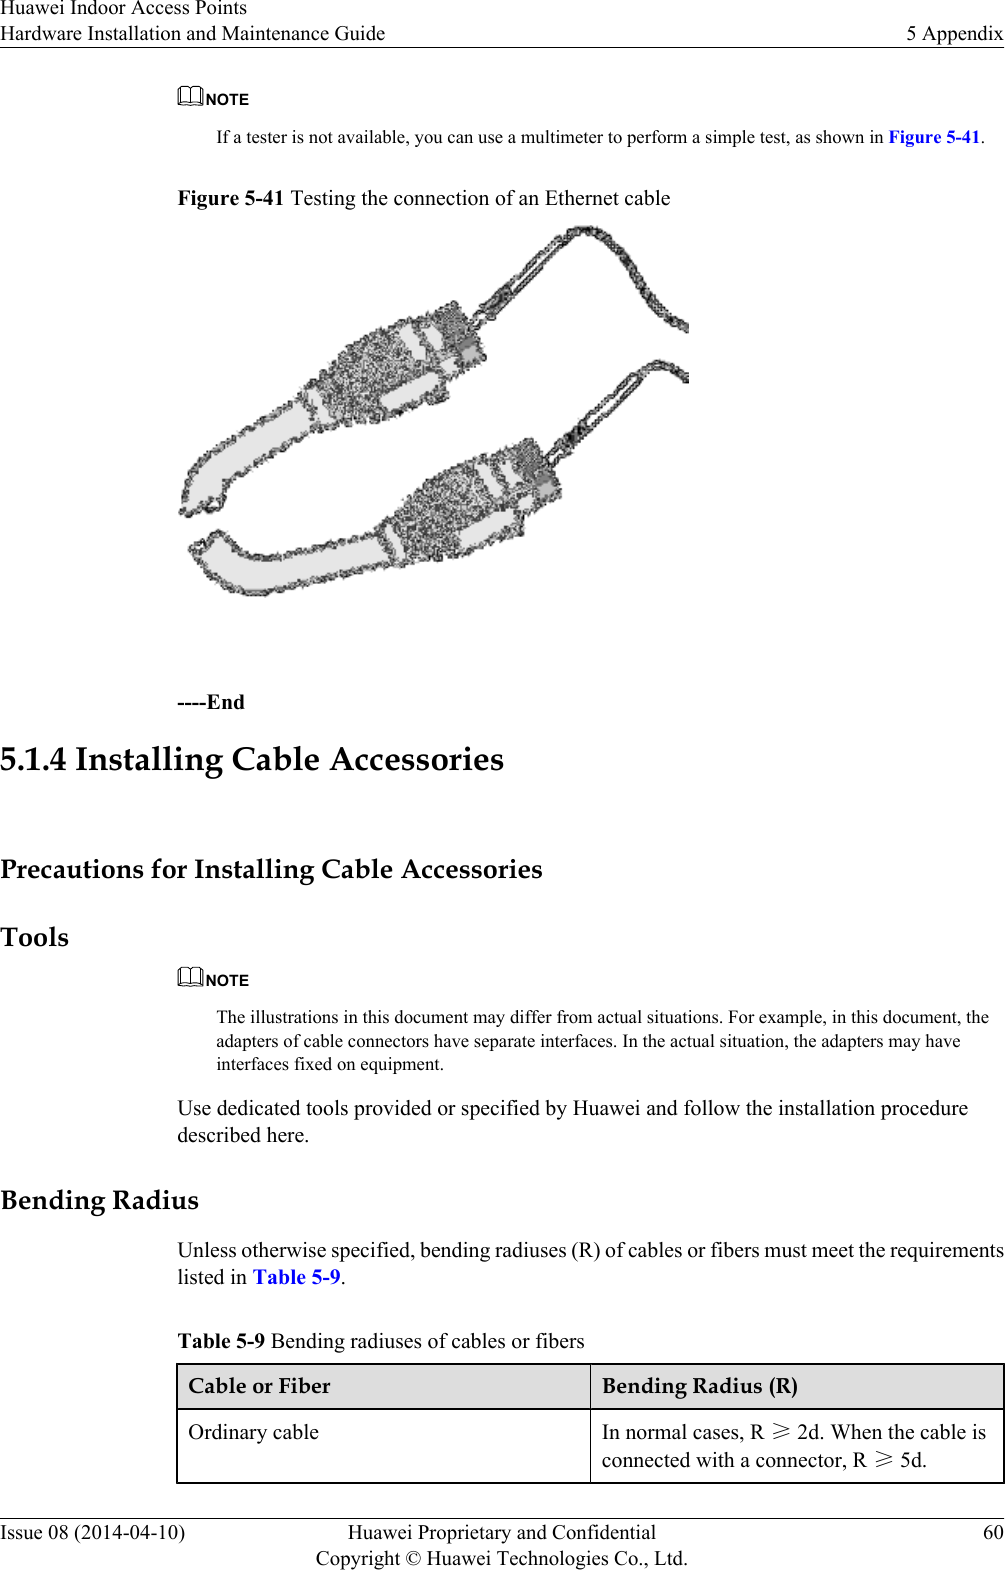 NOTEIf a tester is not available, you can use a multimeter to perform a simple test, as shown in Figure 5-41.Figure 5-41 Testing the connection of an Ethernet cable ----End5.1.4 Installing Cable AccessoriesPrecautions for Installing Cable AccessoriesToolsNOTEThe illustrations in this document may differ from actual situations. For example, in this document, theadapters of cable connectors have separate interfaces. In the actual situation, the adapters may haveinterfaces fixed on equipment.Use dedicated tools provided or specified by Huawei and follow the installation proceduredescribed here.Bending RadiusUnless otherwise specified, bending radiuses (R) of cables or fibers must meet the requirementslisted in Table 5-9.Table 5-9 Bending radiuses of cables or fibersCable or Fiber Bending Radius (R)Ordinary cable In normal cases, R ≥ 2d. When the cable isconnected with a connector, R ≥ 5d.Huawei Indoor Access PointsHardware Installation and Maintenance Guide 5 AppendixIssue 08 (2014-04-10) Huawei Proprietary and ConfidentialCopyright © Huawei Technologies Co., Ltd.60